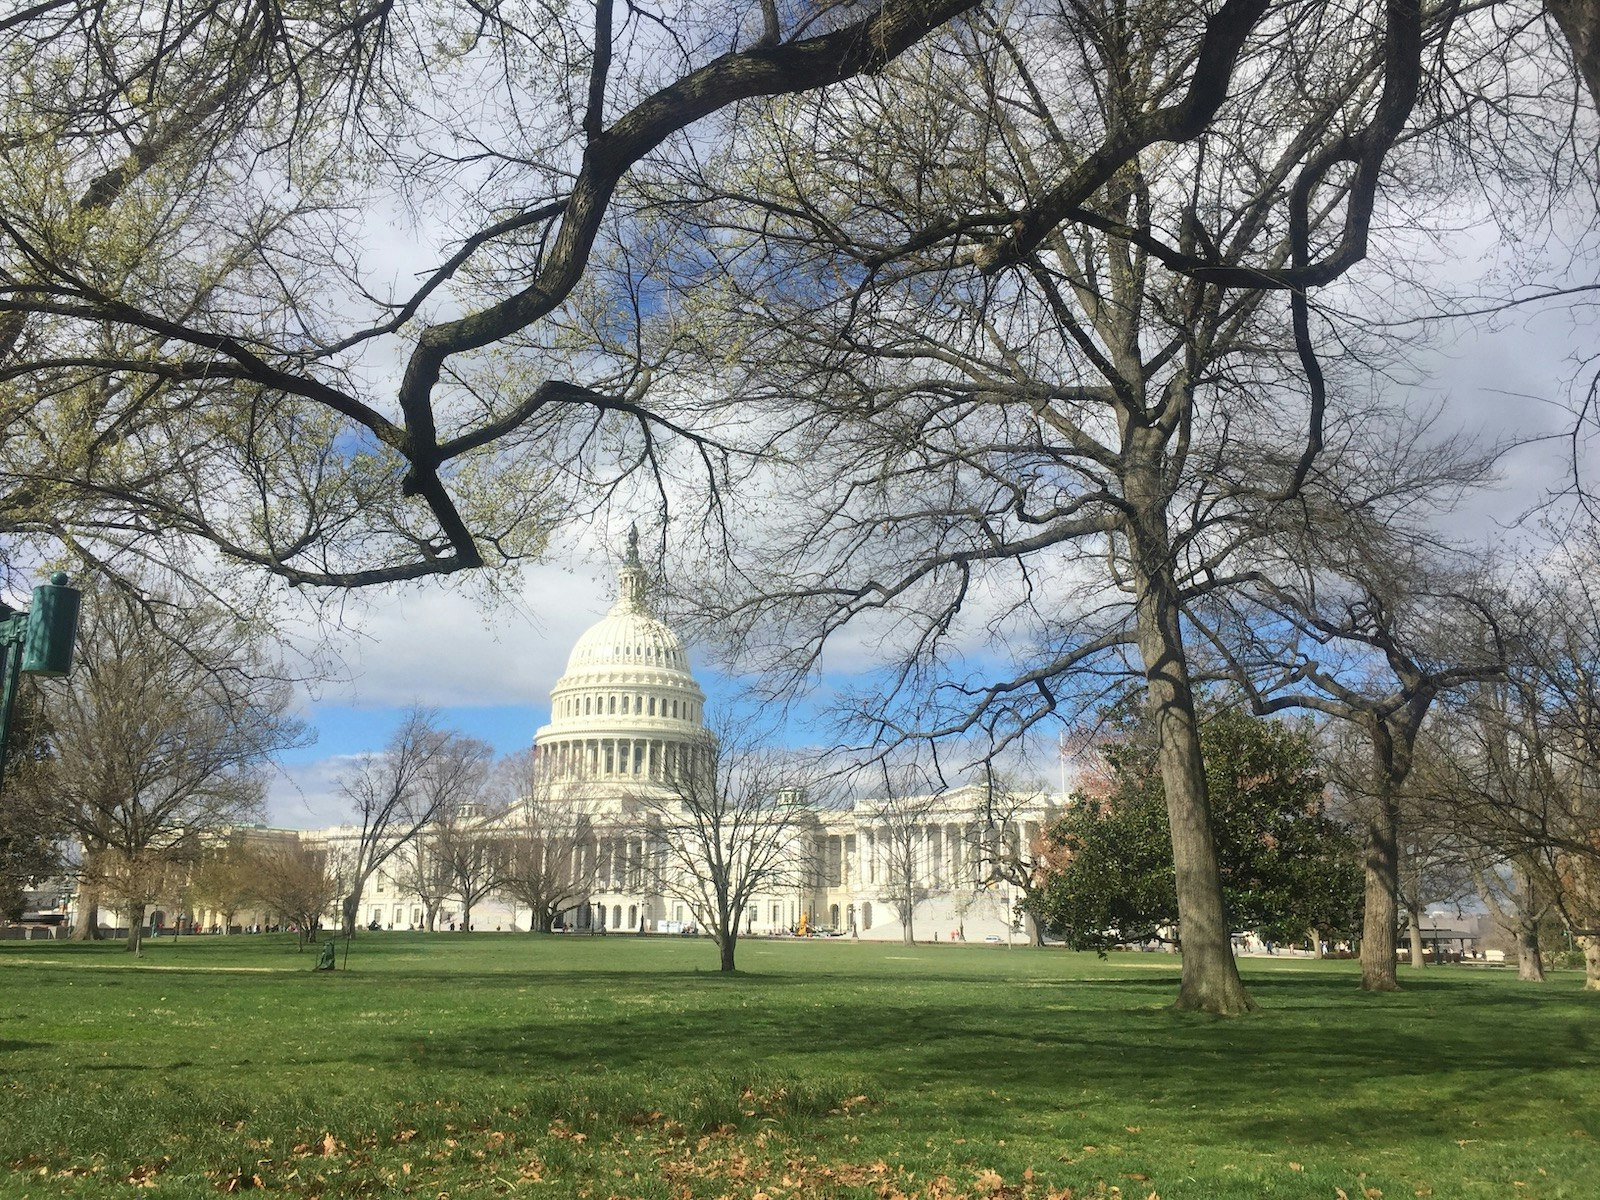 A wide view of the white stone US Capitol building in Washington, DC, framed by trees and under blue sky in the early spring